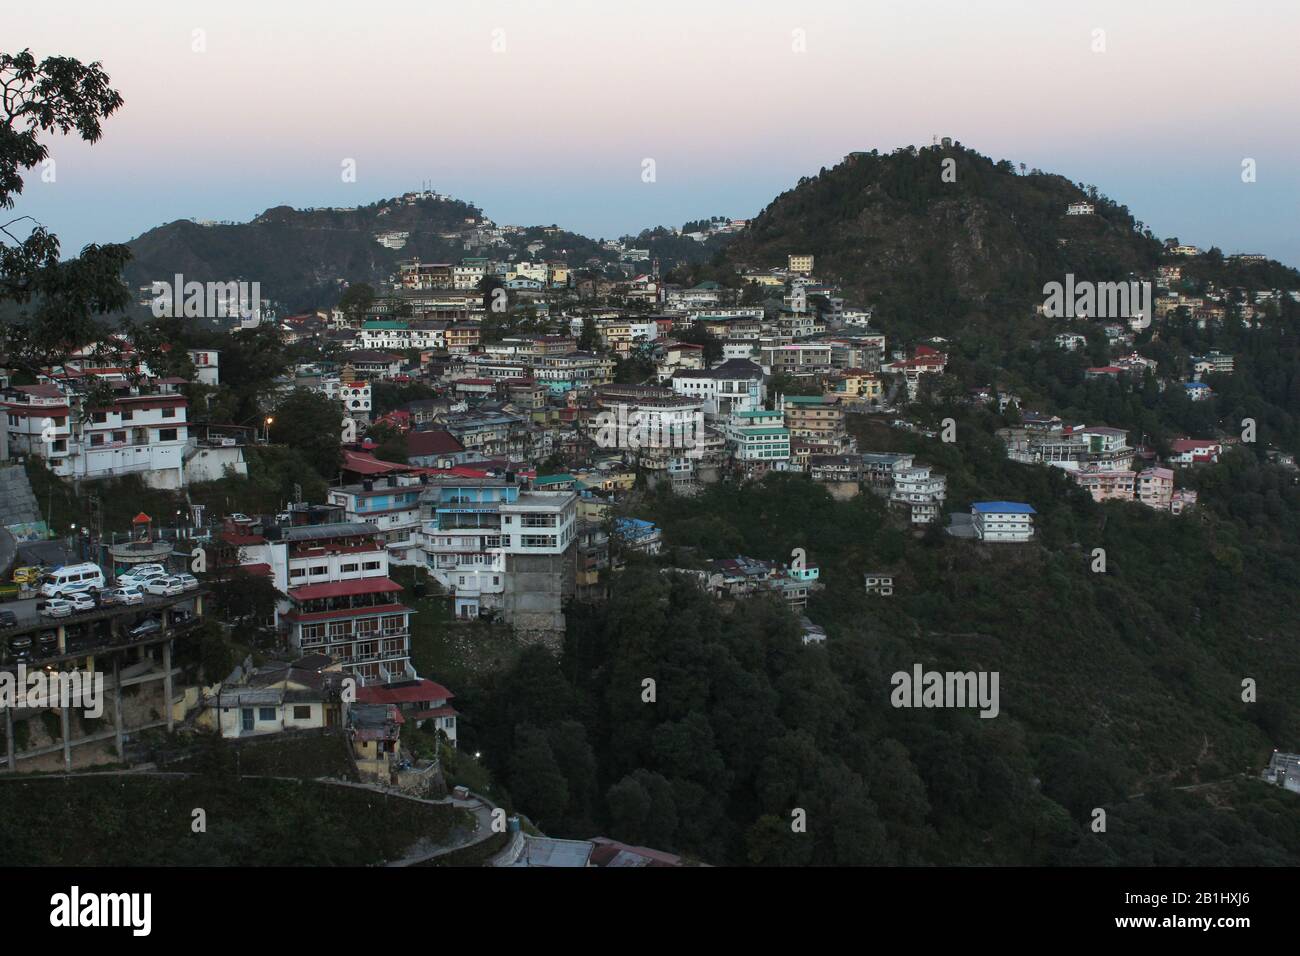 Aerial view of village in the morning, Mussoorie, Uttarakhand, India Stock Photo